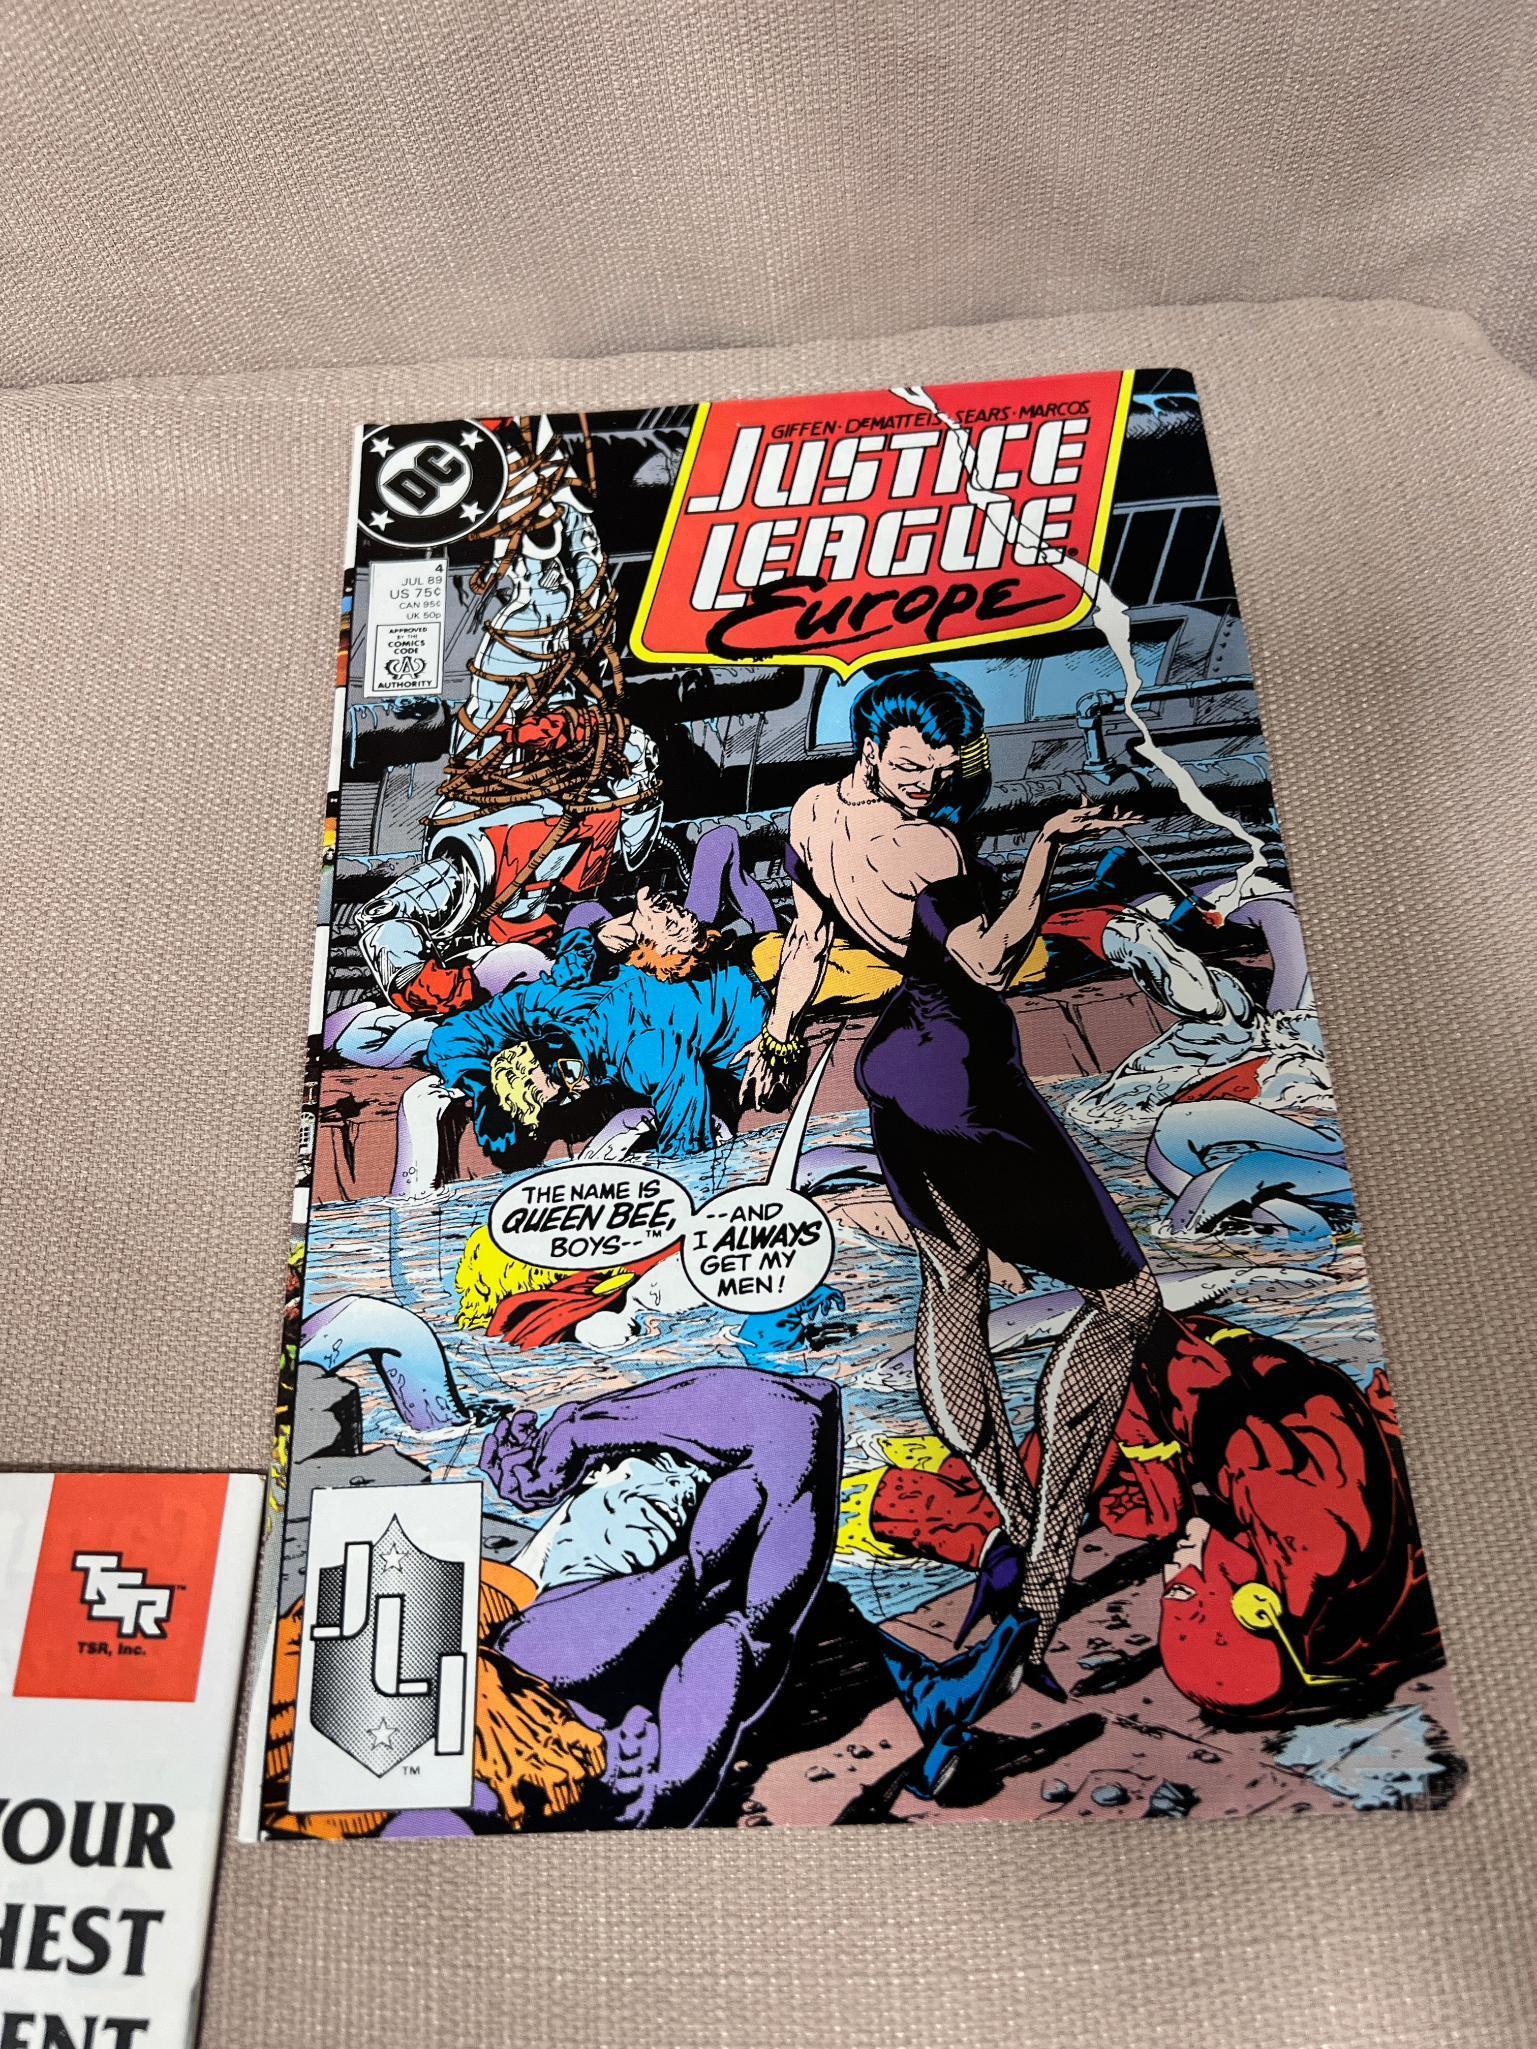 Justice League Europe, West Coast Avengers, Green Lantern and more